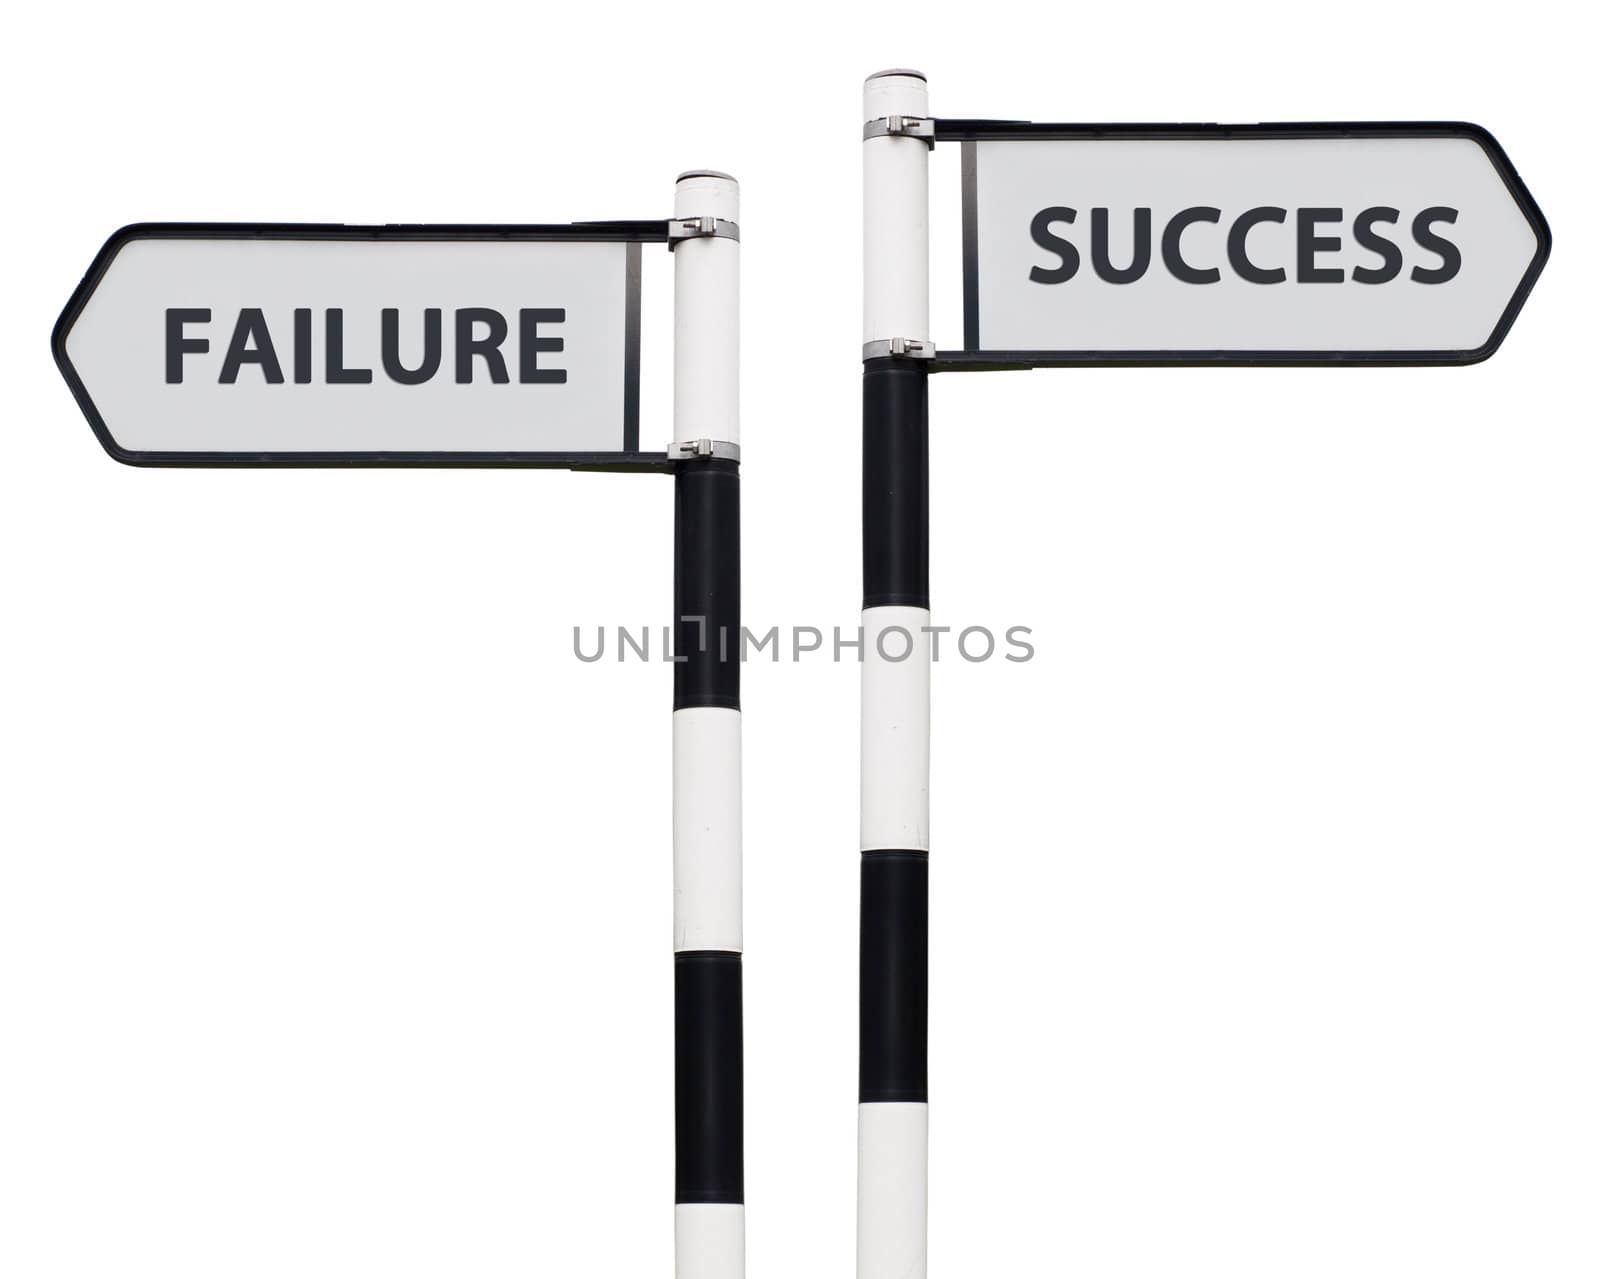 Success and failure signs by luissantos84